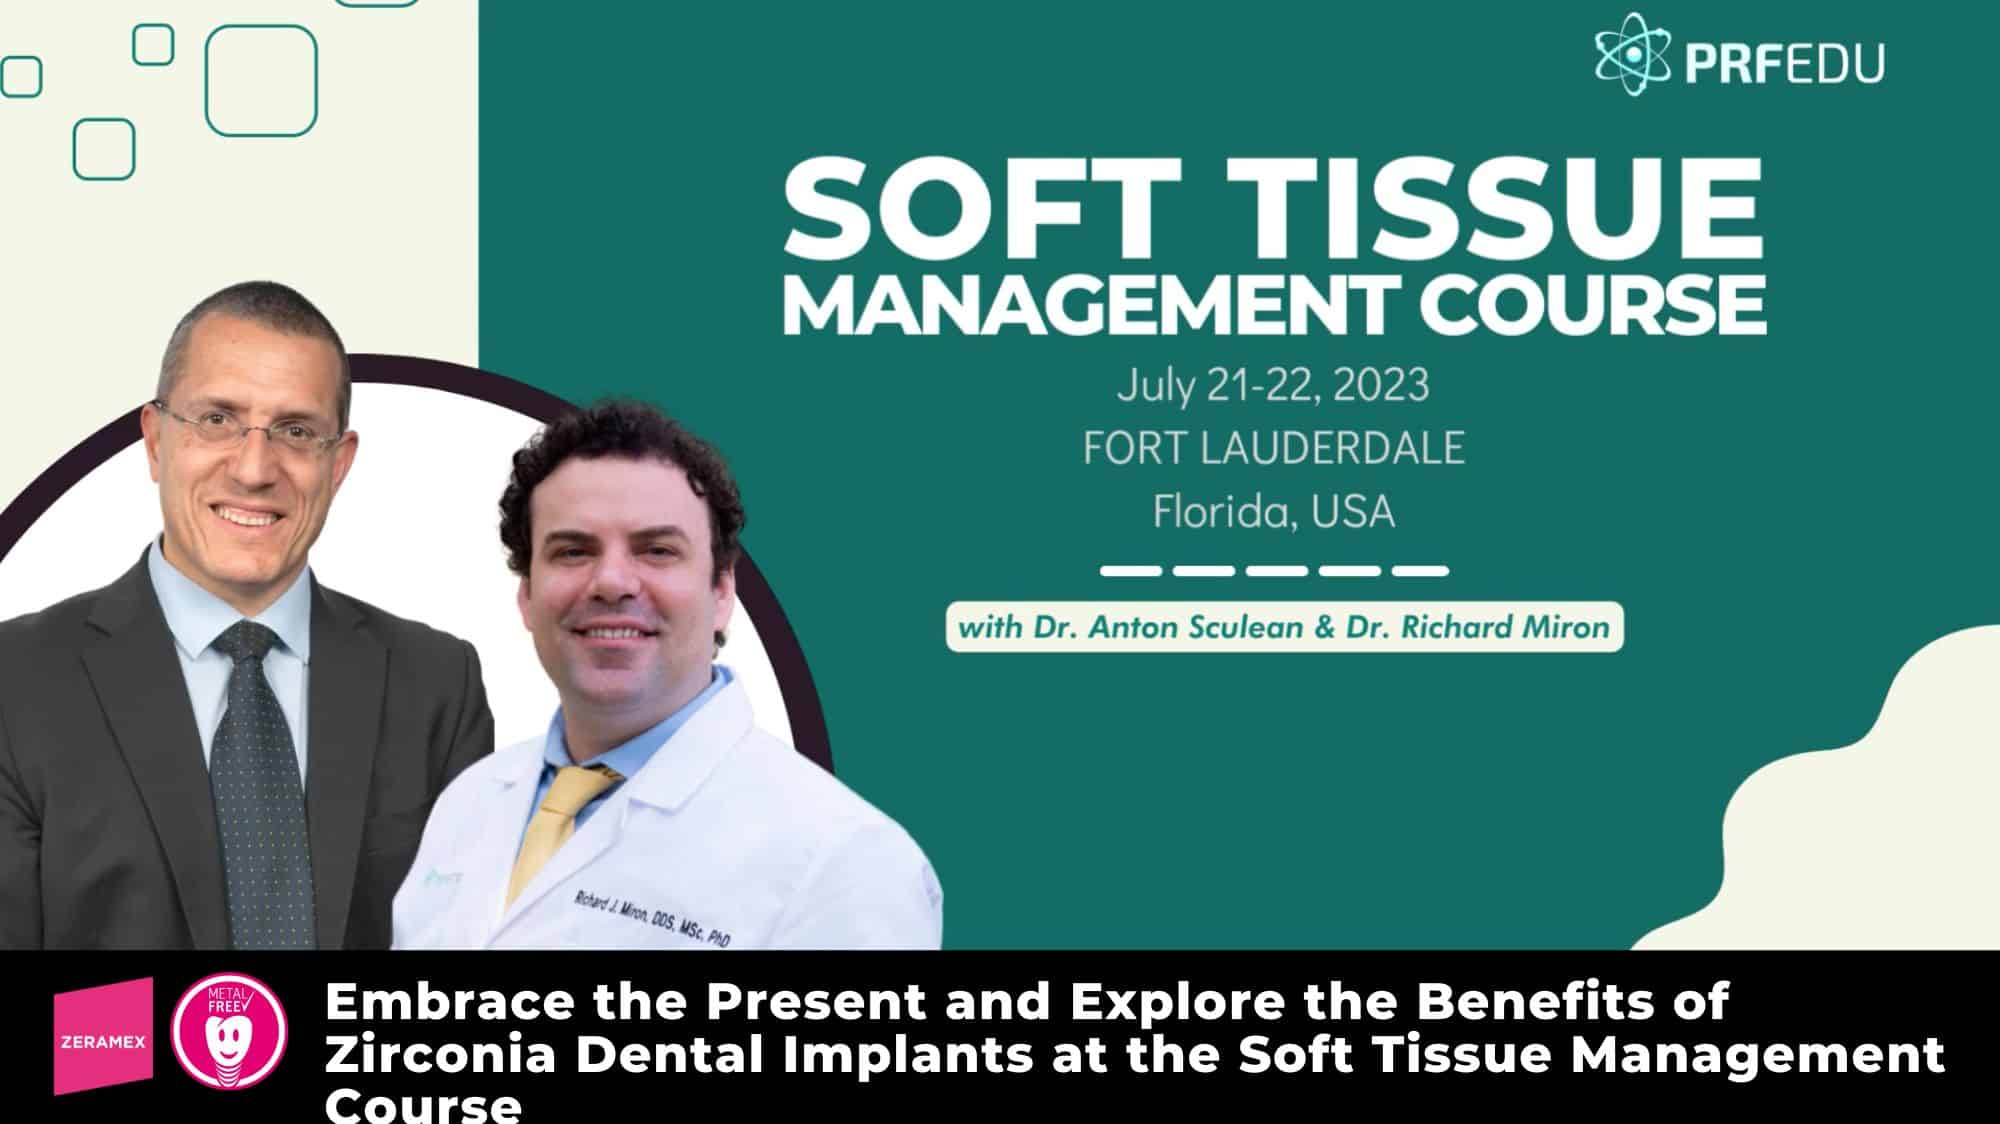 Embrace the Present and Explore the Benefits of Zirconia Dental Implants at the Soft Tissue Management Course